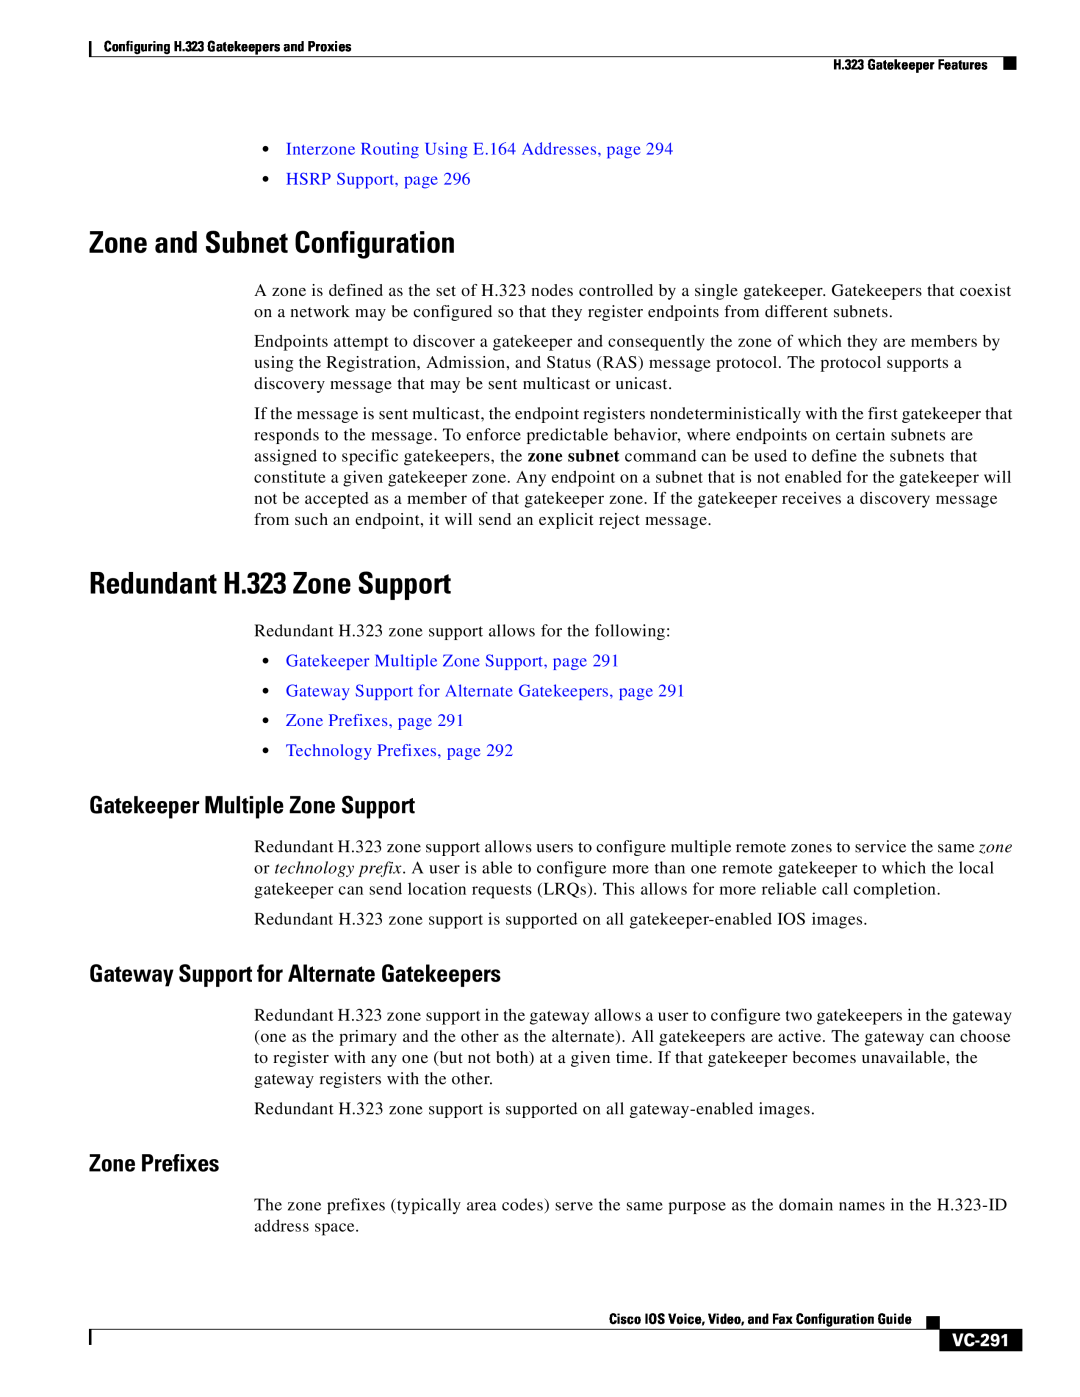 Cisco Systems VC-289 Zone and Subnet Configuration, Redundant H.323 Zone Support, Gatekeeper Multiple Zone Support, VC-291 